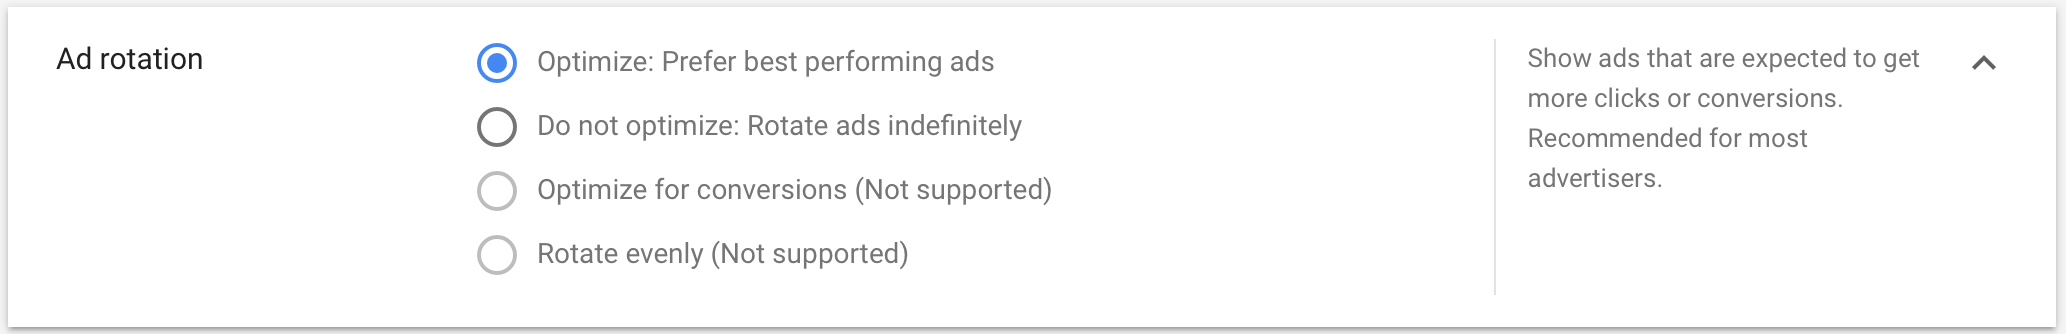 Ad Rotation in Google Ads